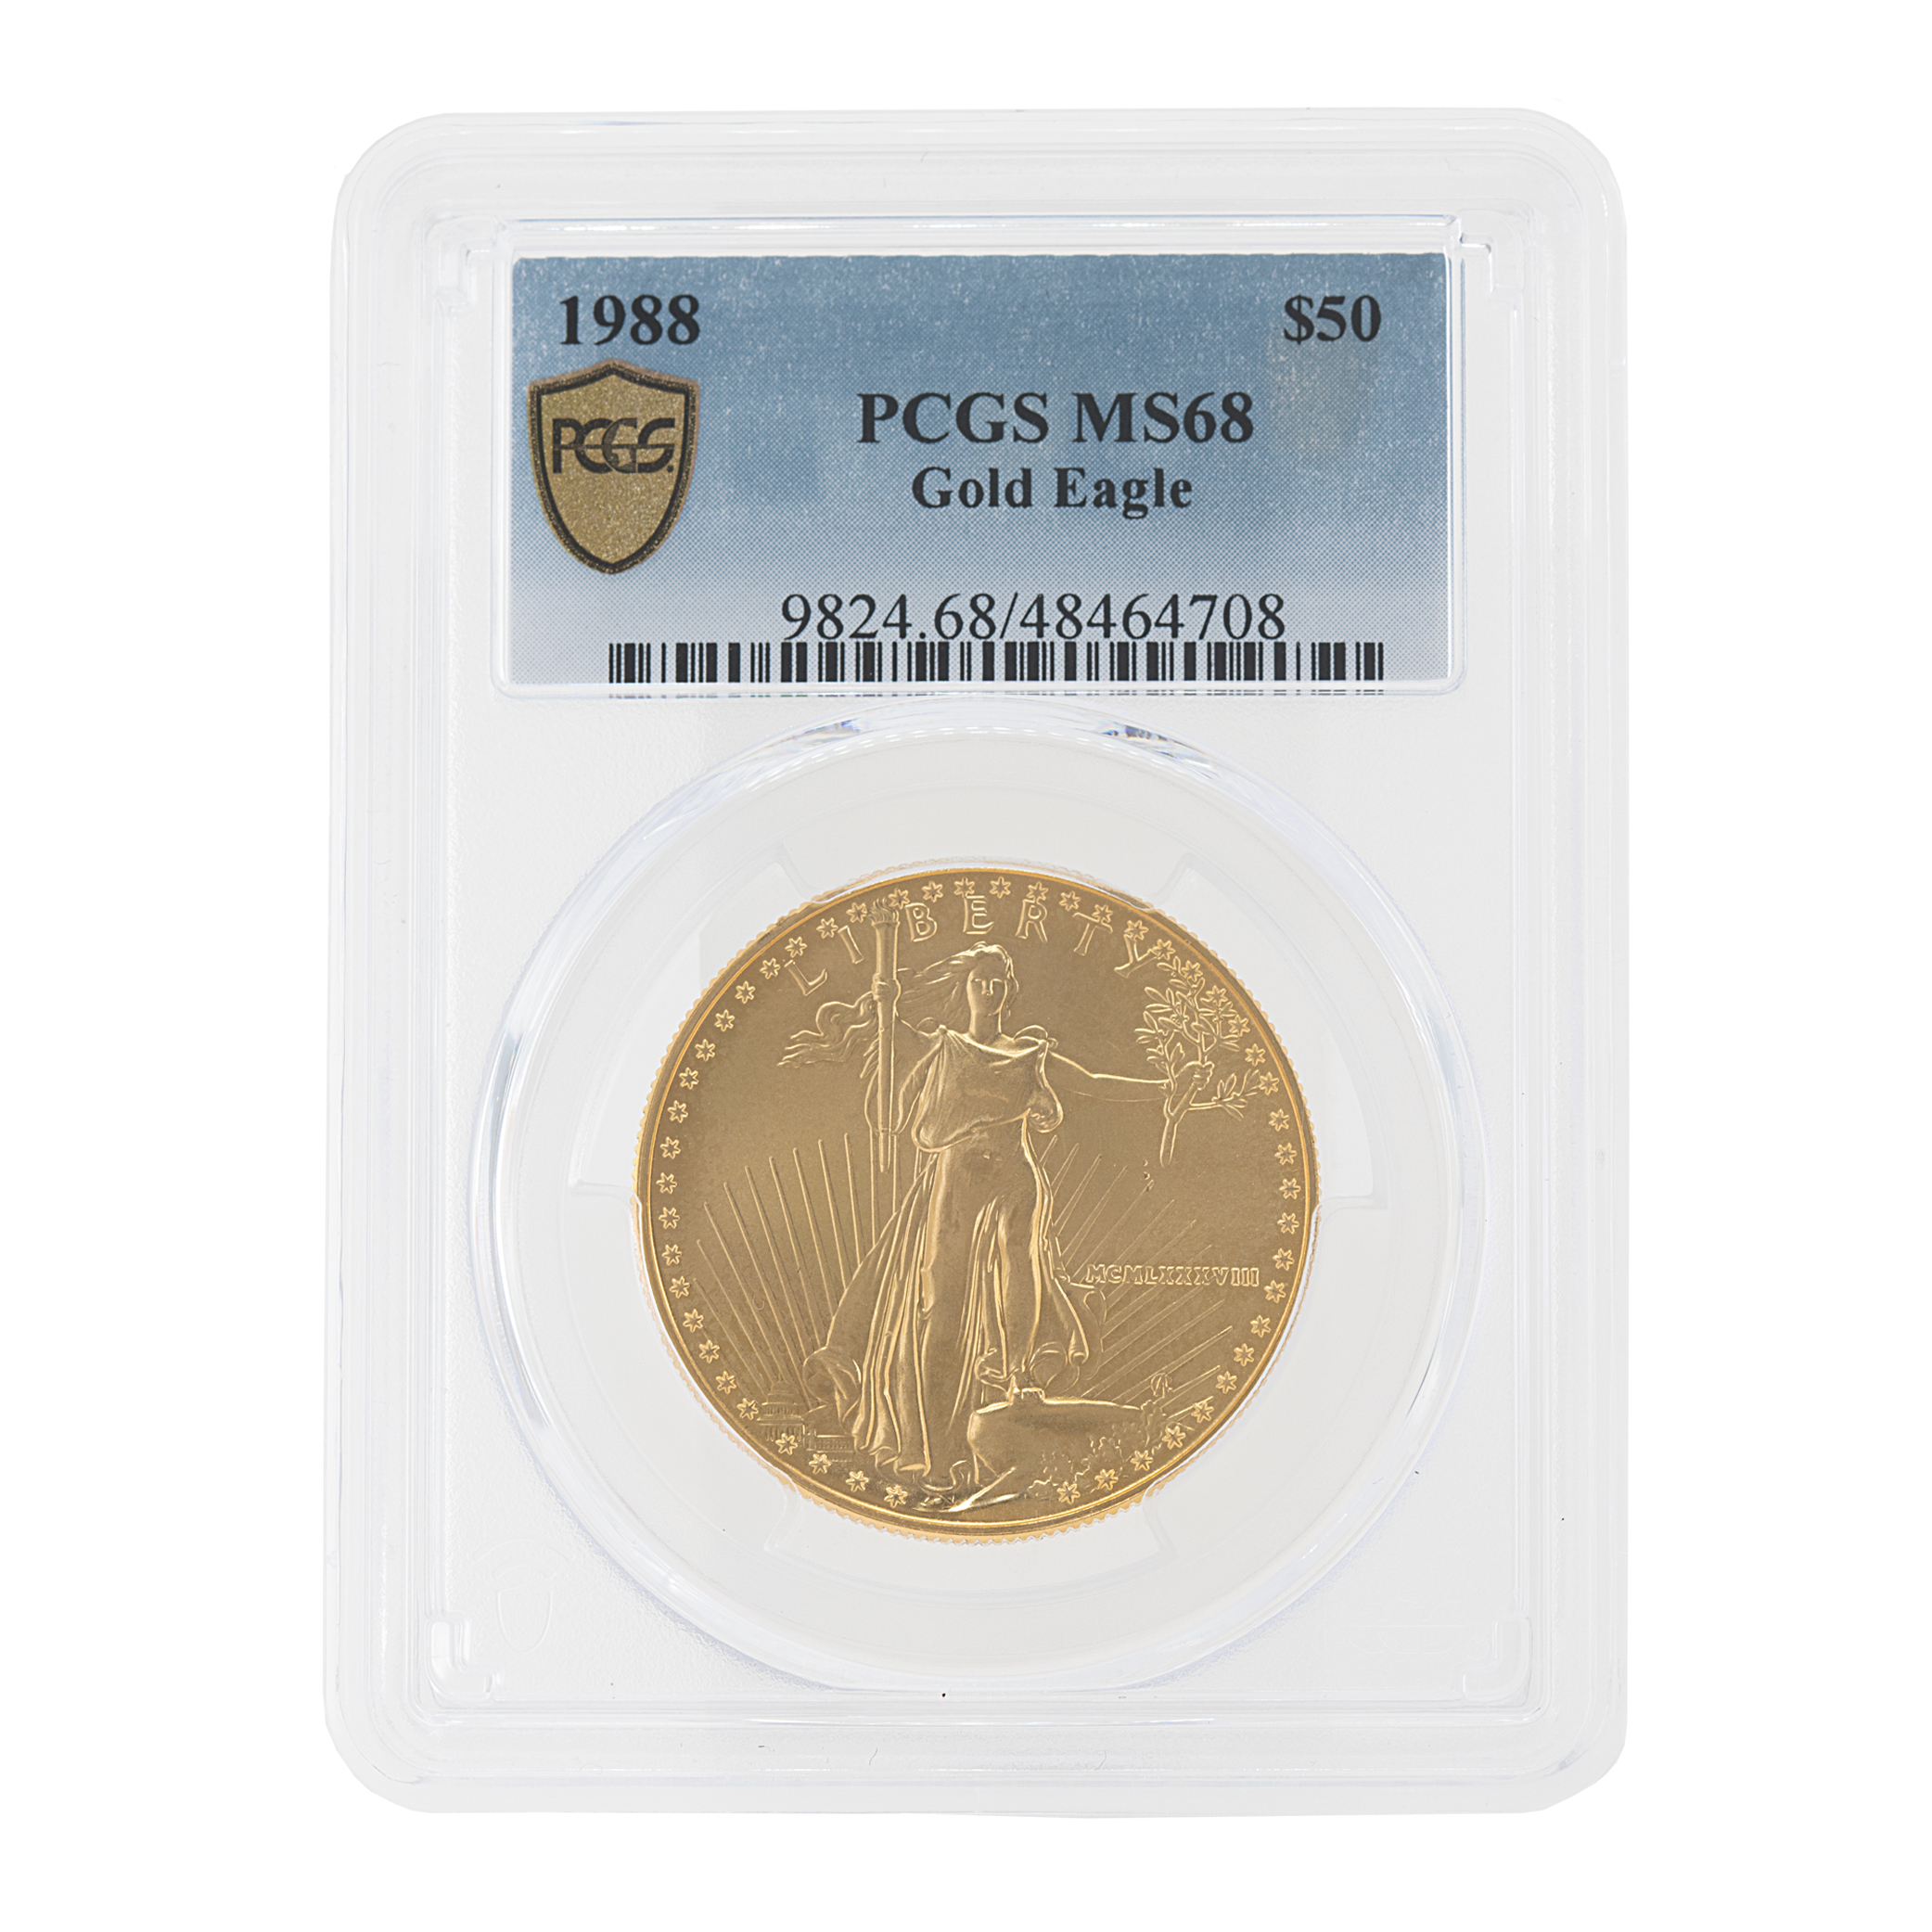 $50 Gold American Eagle Coin from 1988. Uncirculated PCGS grading of MS68